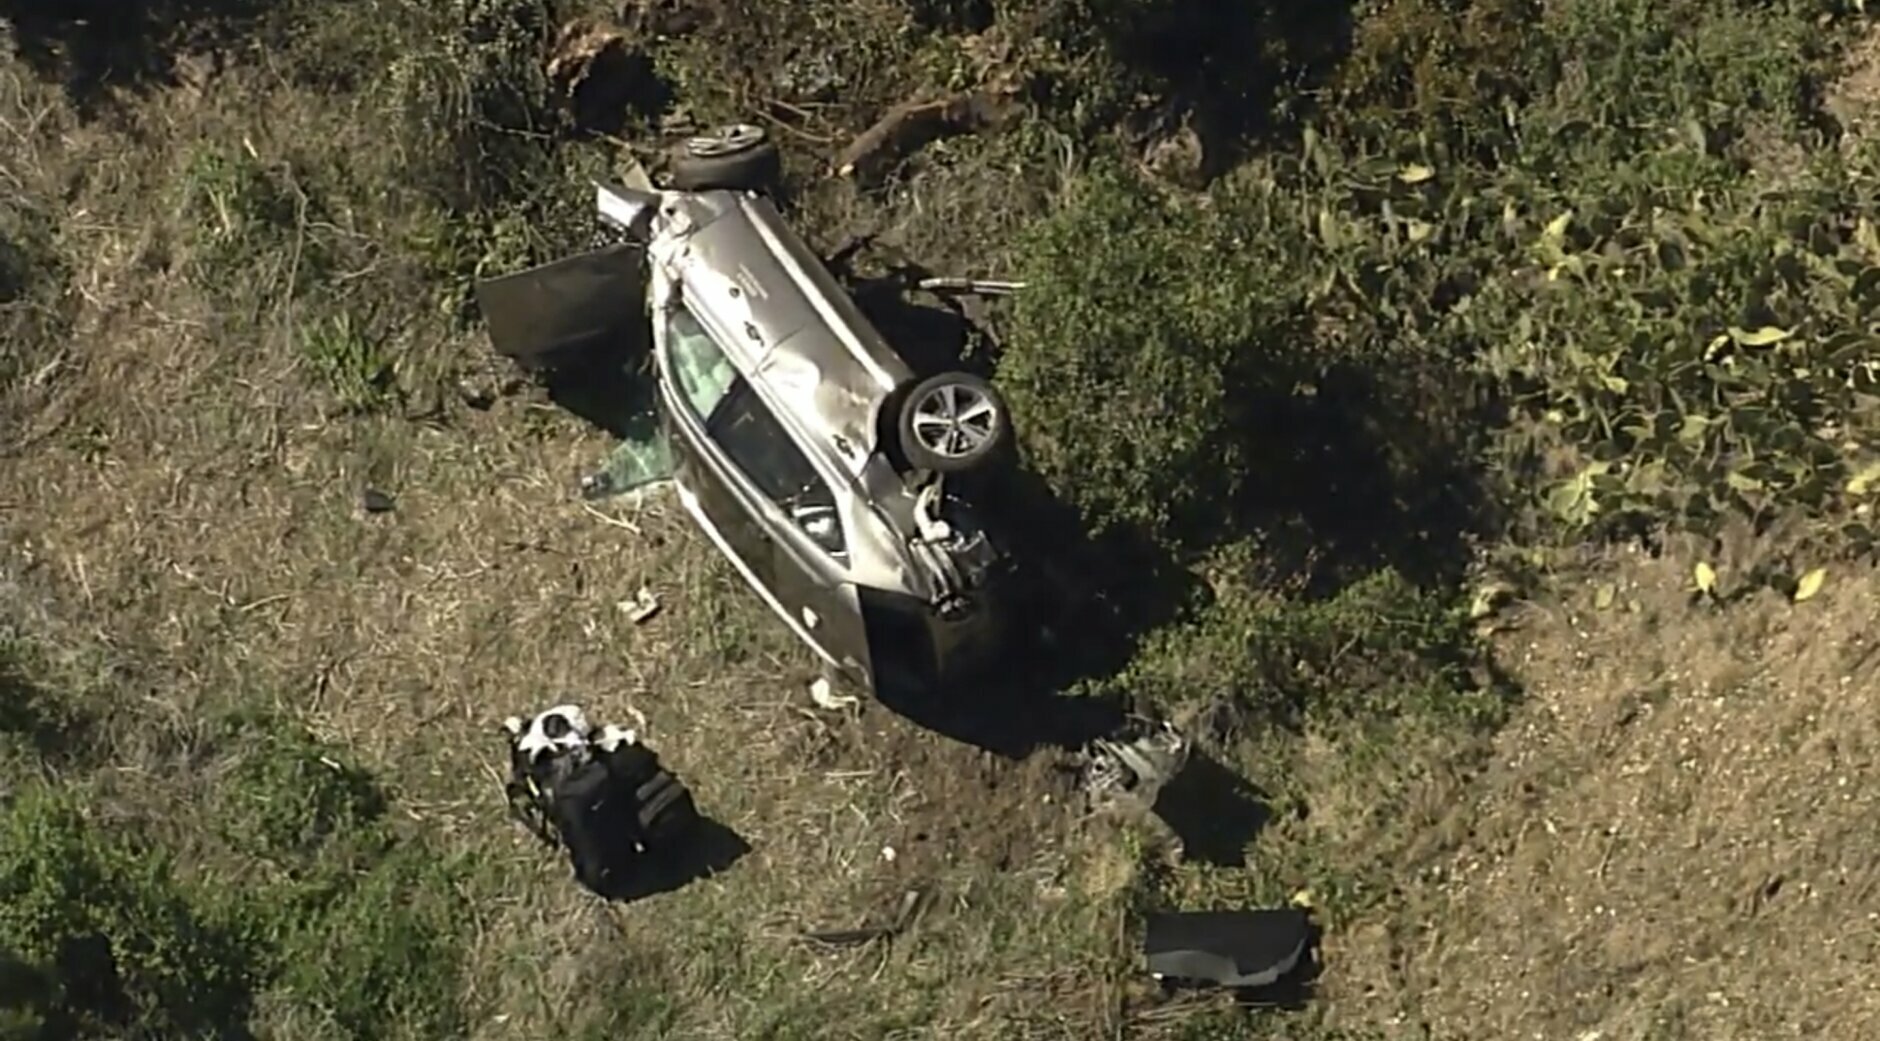 In this aerial image take from video provided by KABC-TV, a vehicle rest on its side after a rollover accident involving golfer Tiger Woods along a road in the Rancho Palos Verdes suburb of Los Angeles on Tuesday, Feb. 23, 2021. Woods had to be extricated from the vehicle with the "jaws of life" tools, the Los Angeles County Sheriff's Department said in a statement. Woods was taken to the hospital with unspecified injuries. The vehicle sustained major damage, the sheriff's department said. (KABC-TV via AP)